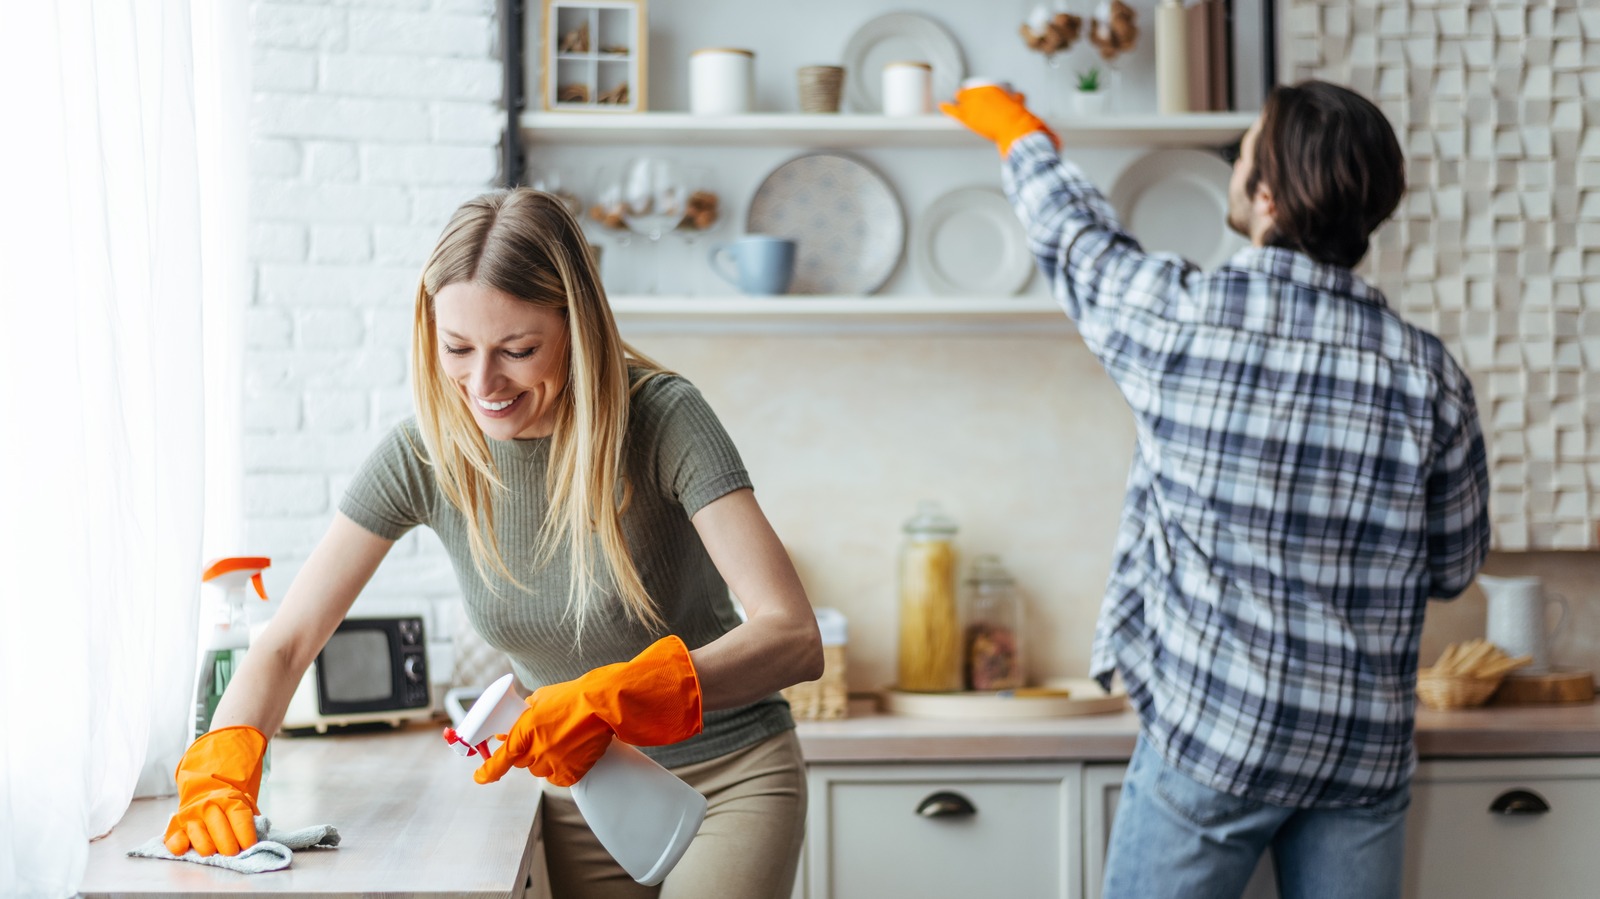 https://www.housedigest.com/img/gallery/you-really-dont-have-to-clean-these-kitchens-items-as-often-as-you-think/l-intro-1700053327.jpg